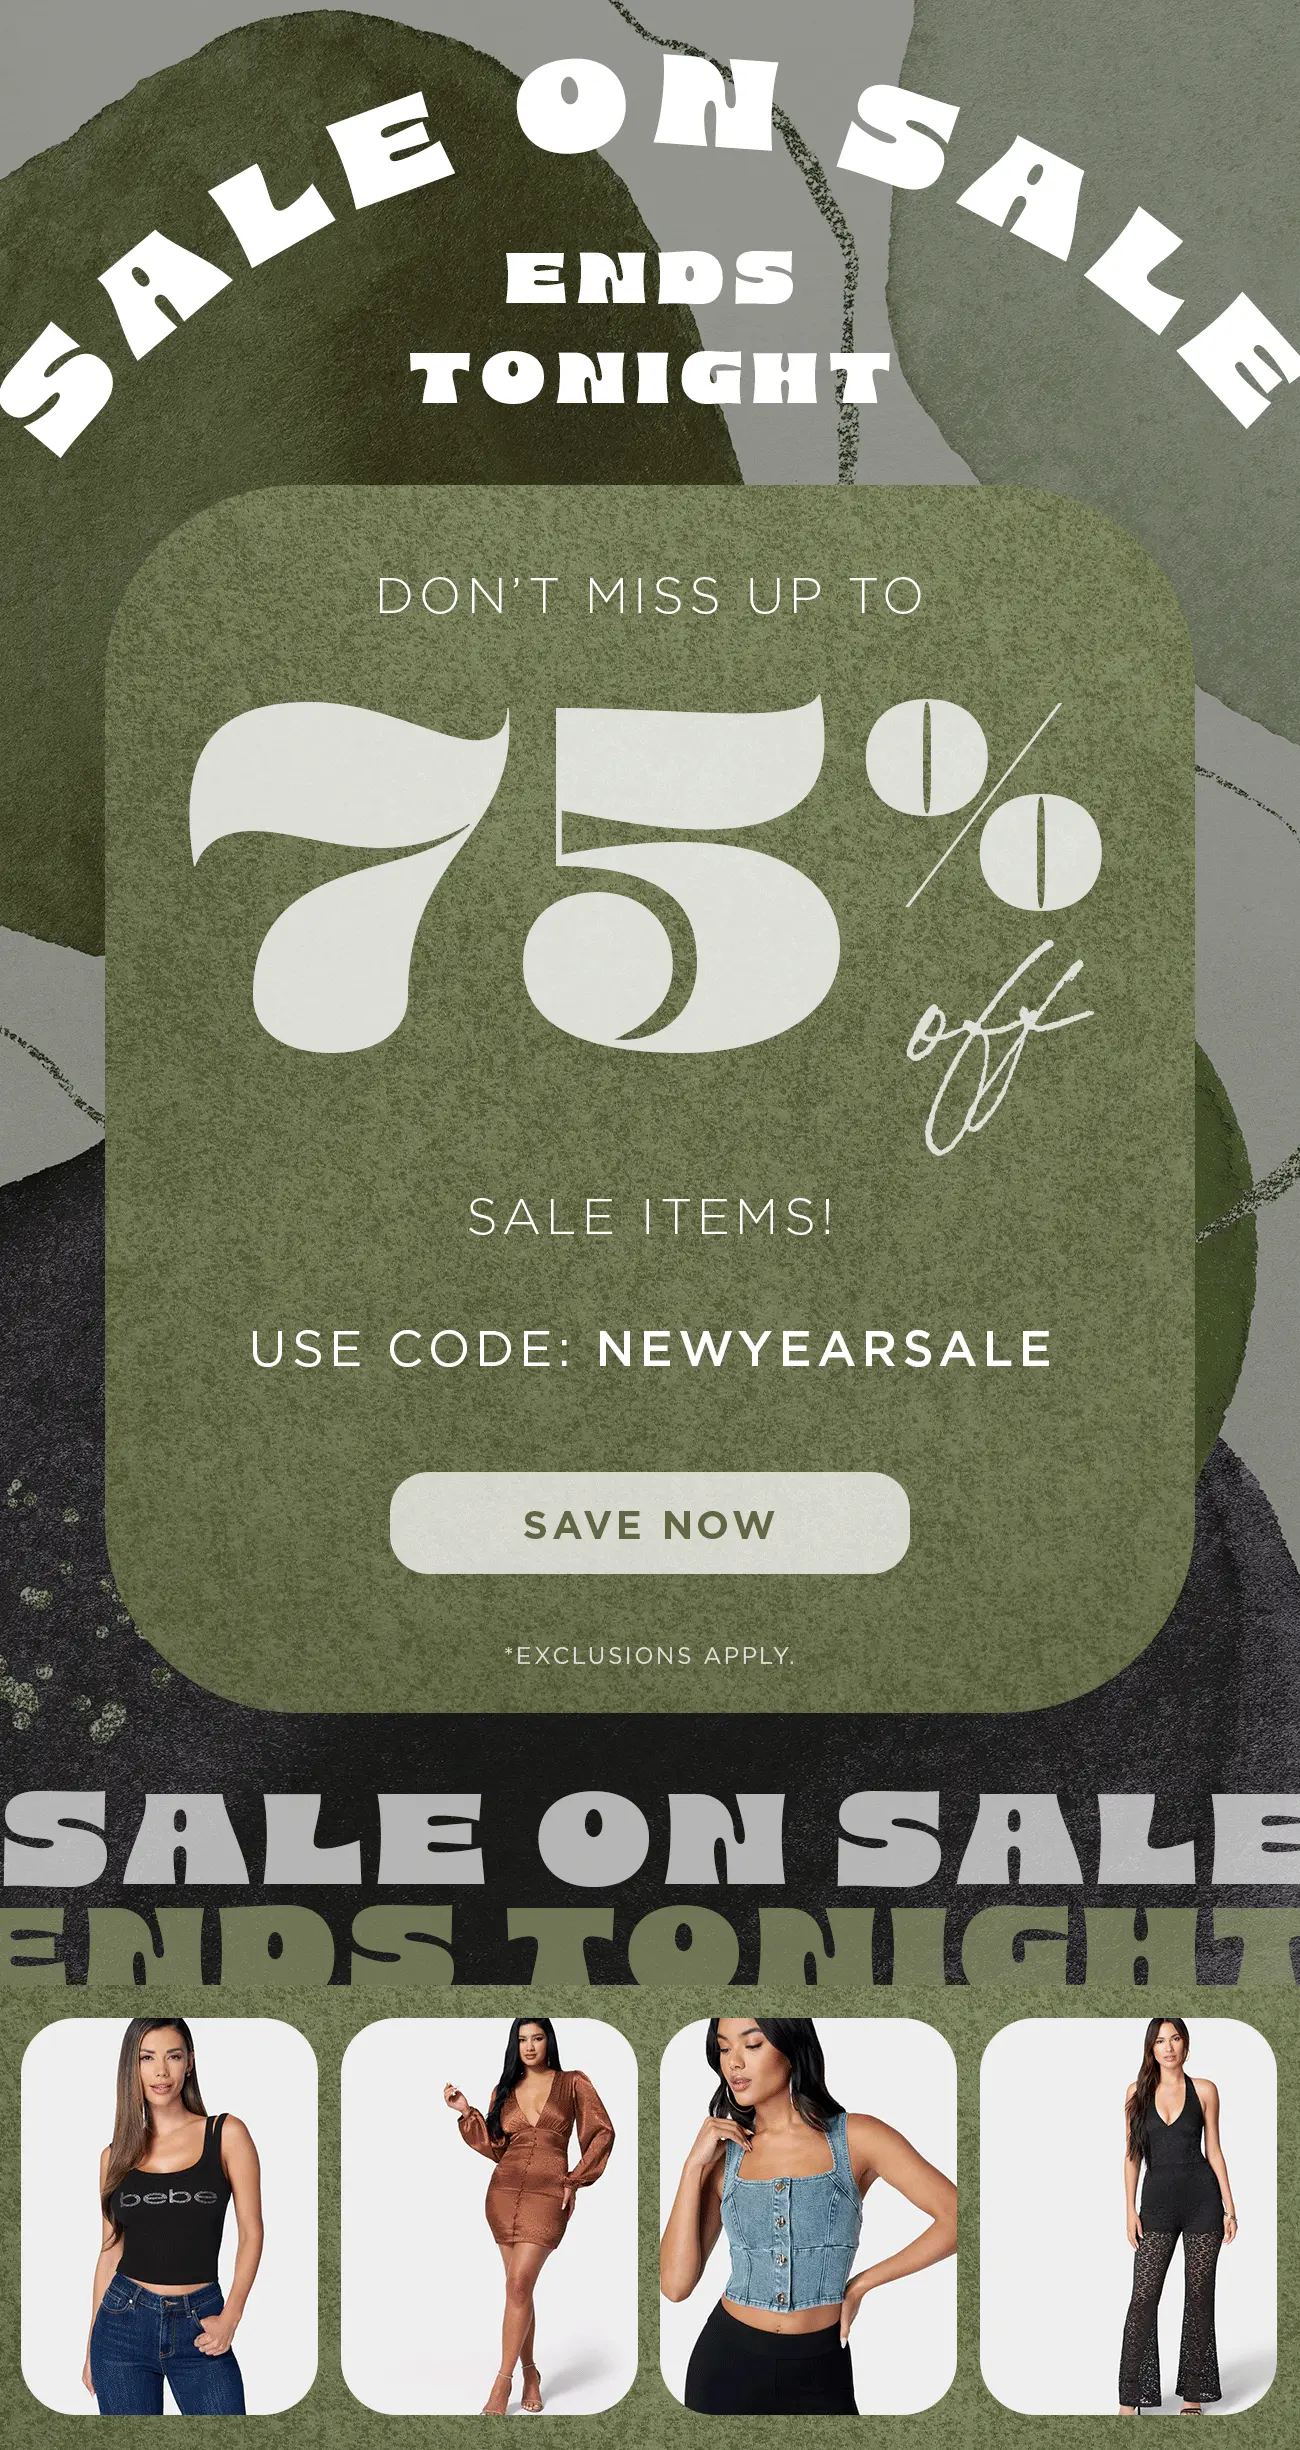 Don't Miss Up To 75% Off | Save Now